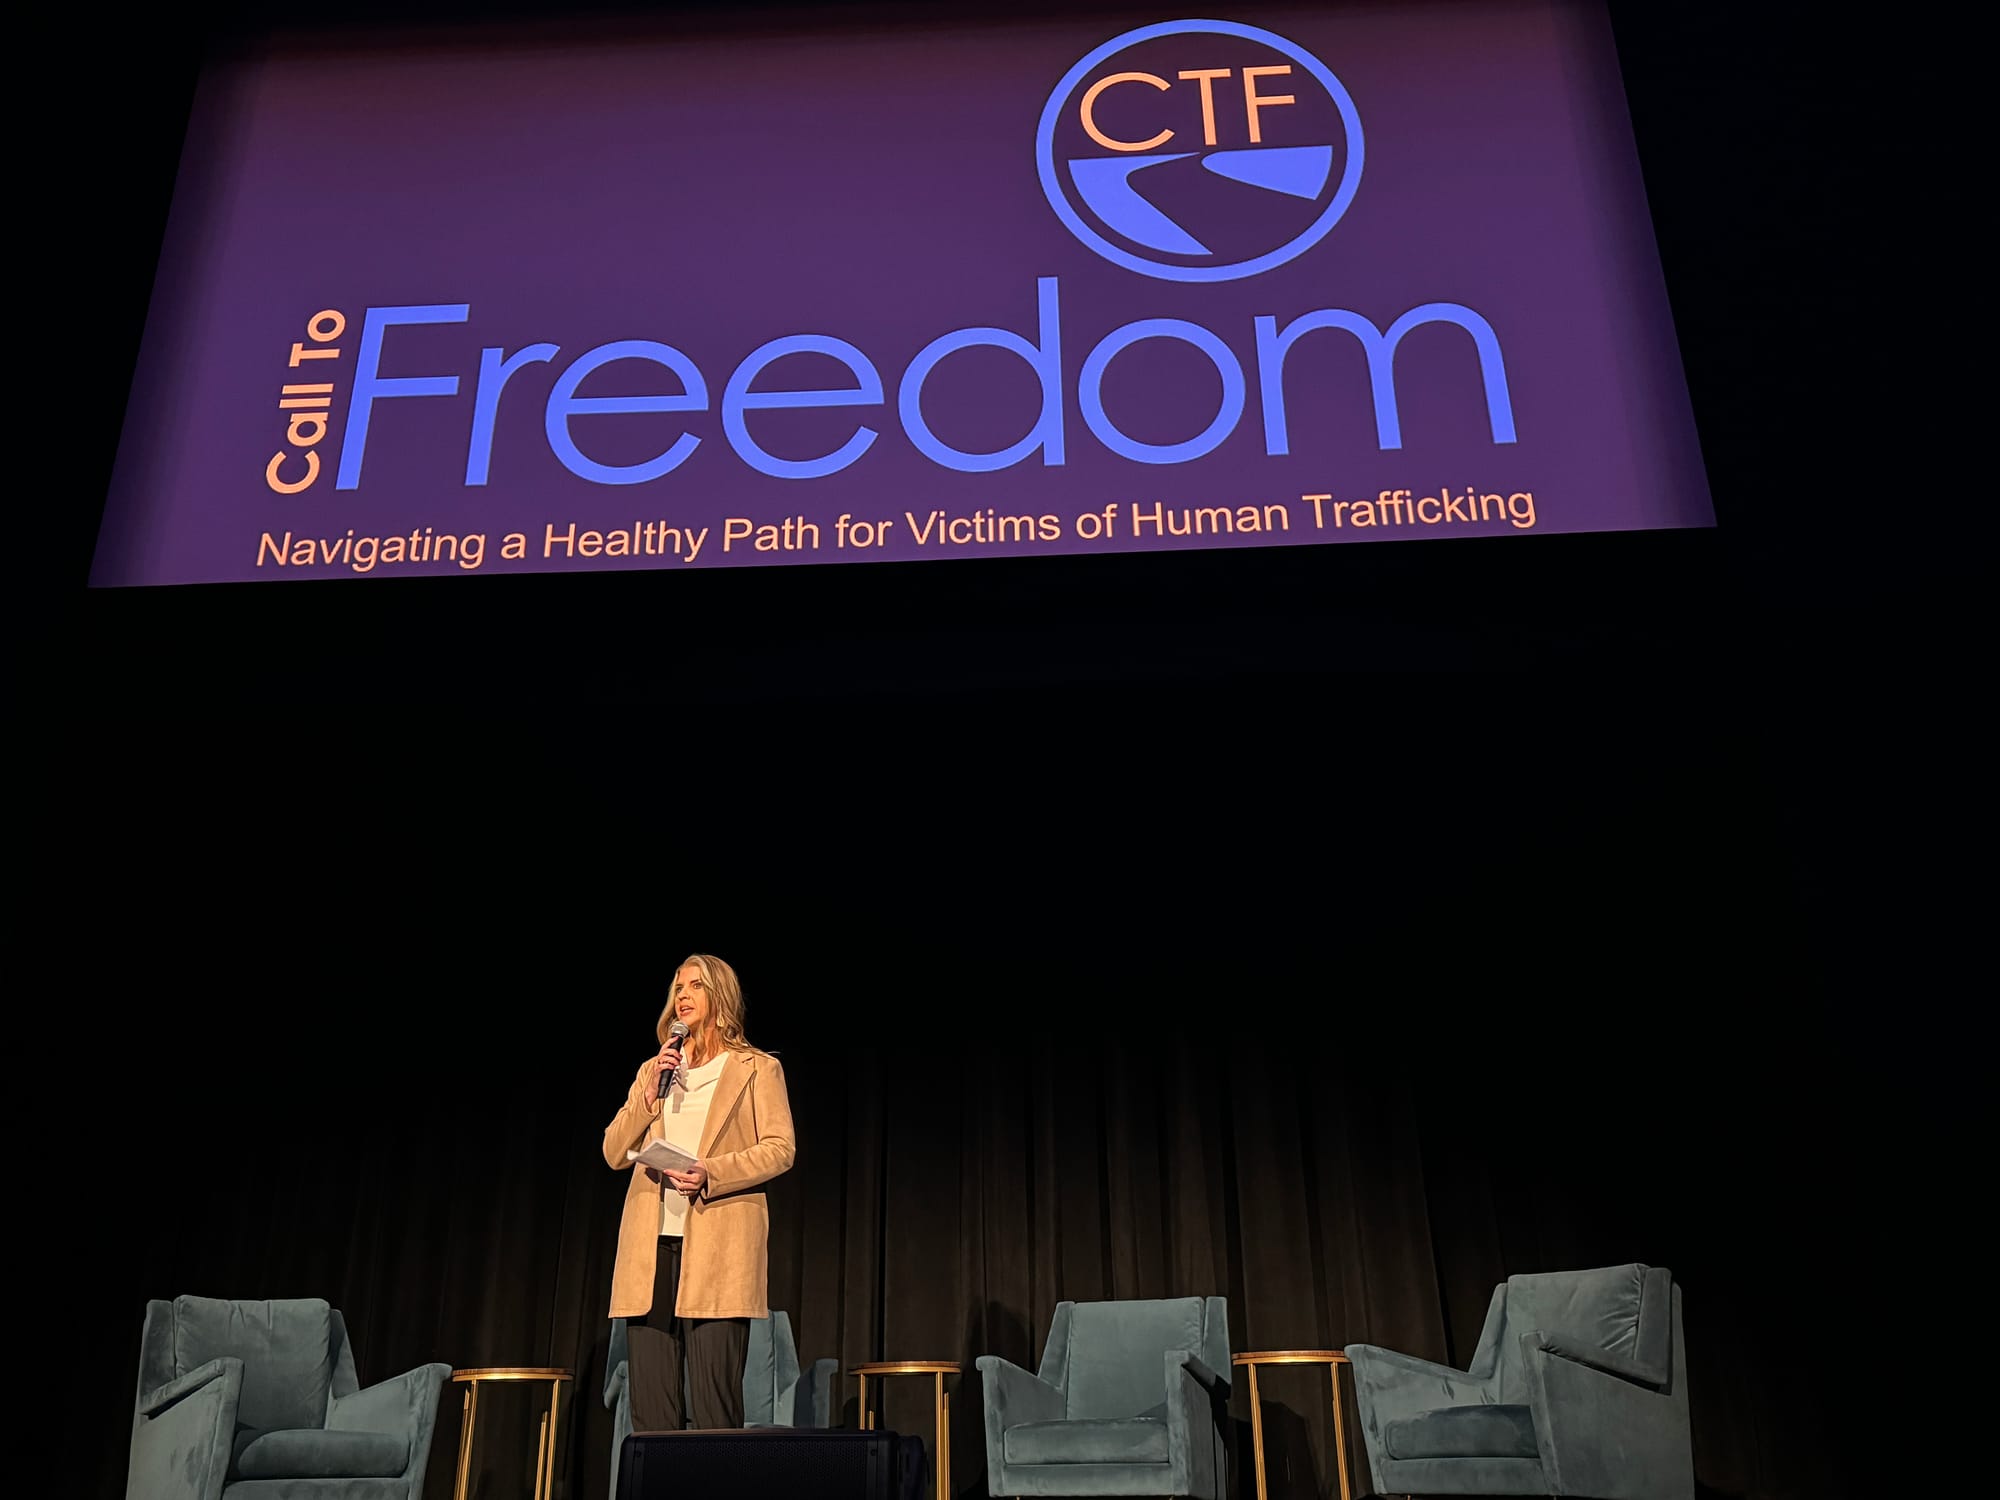 Call to Freedom CEO Becky Rasmussen speaks at an event on human trafficking